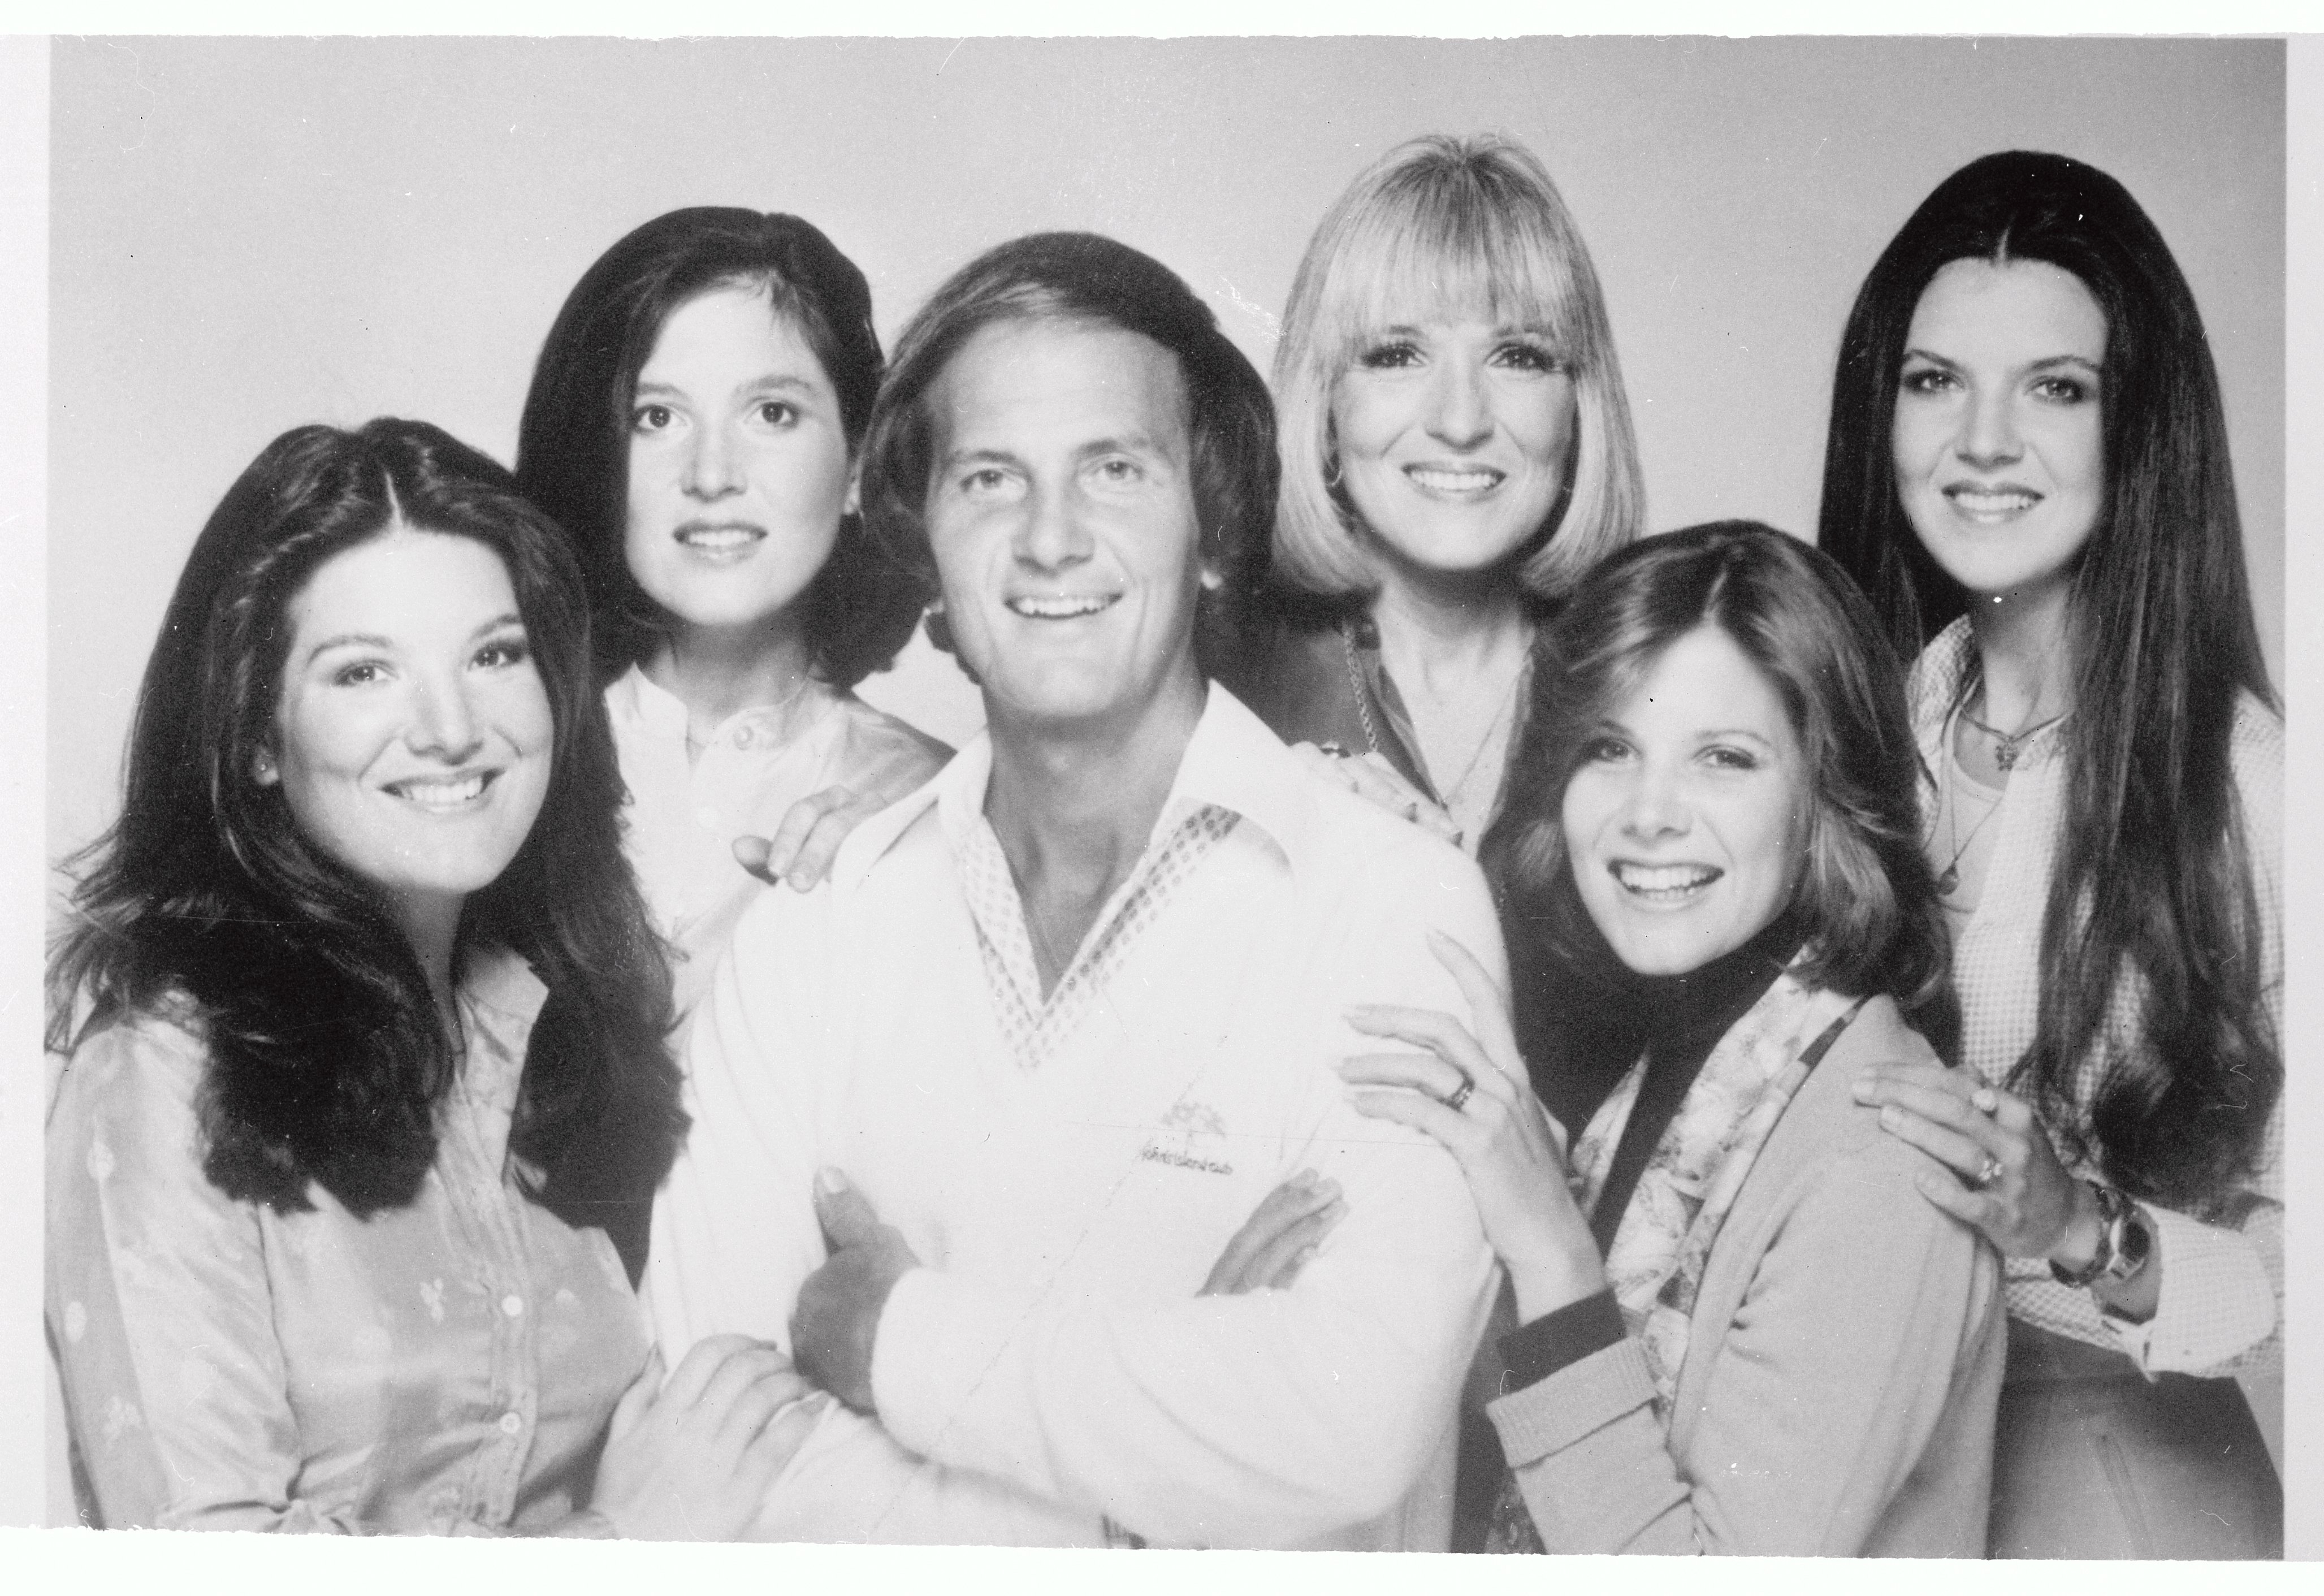 Laury, Lindy, Pat, Shirley, Debby, and Cherry Boone at a taping for "Pat Boone and Family" on March 31, 1978, in Hollywood. | Source: Getty Images